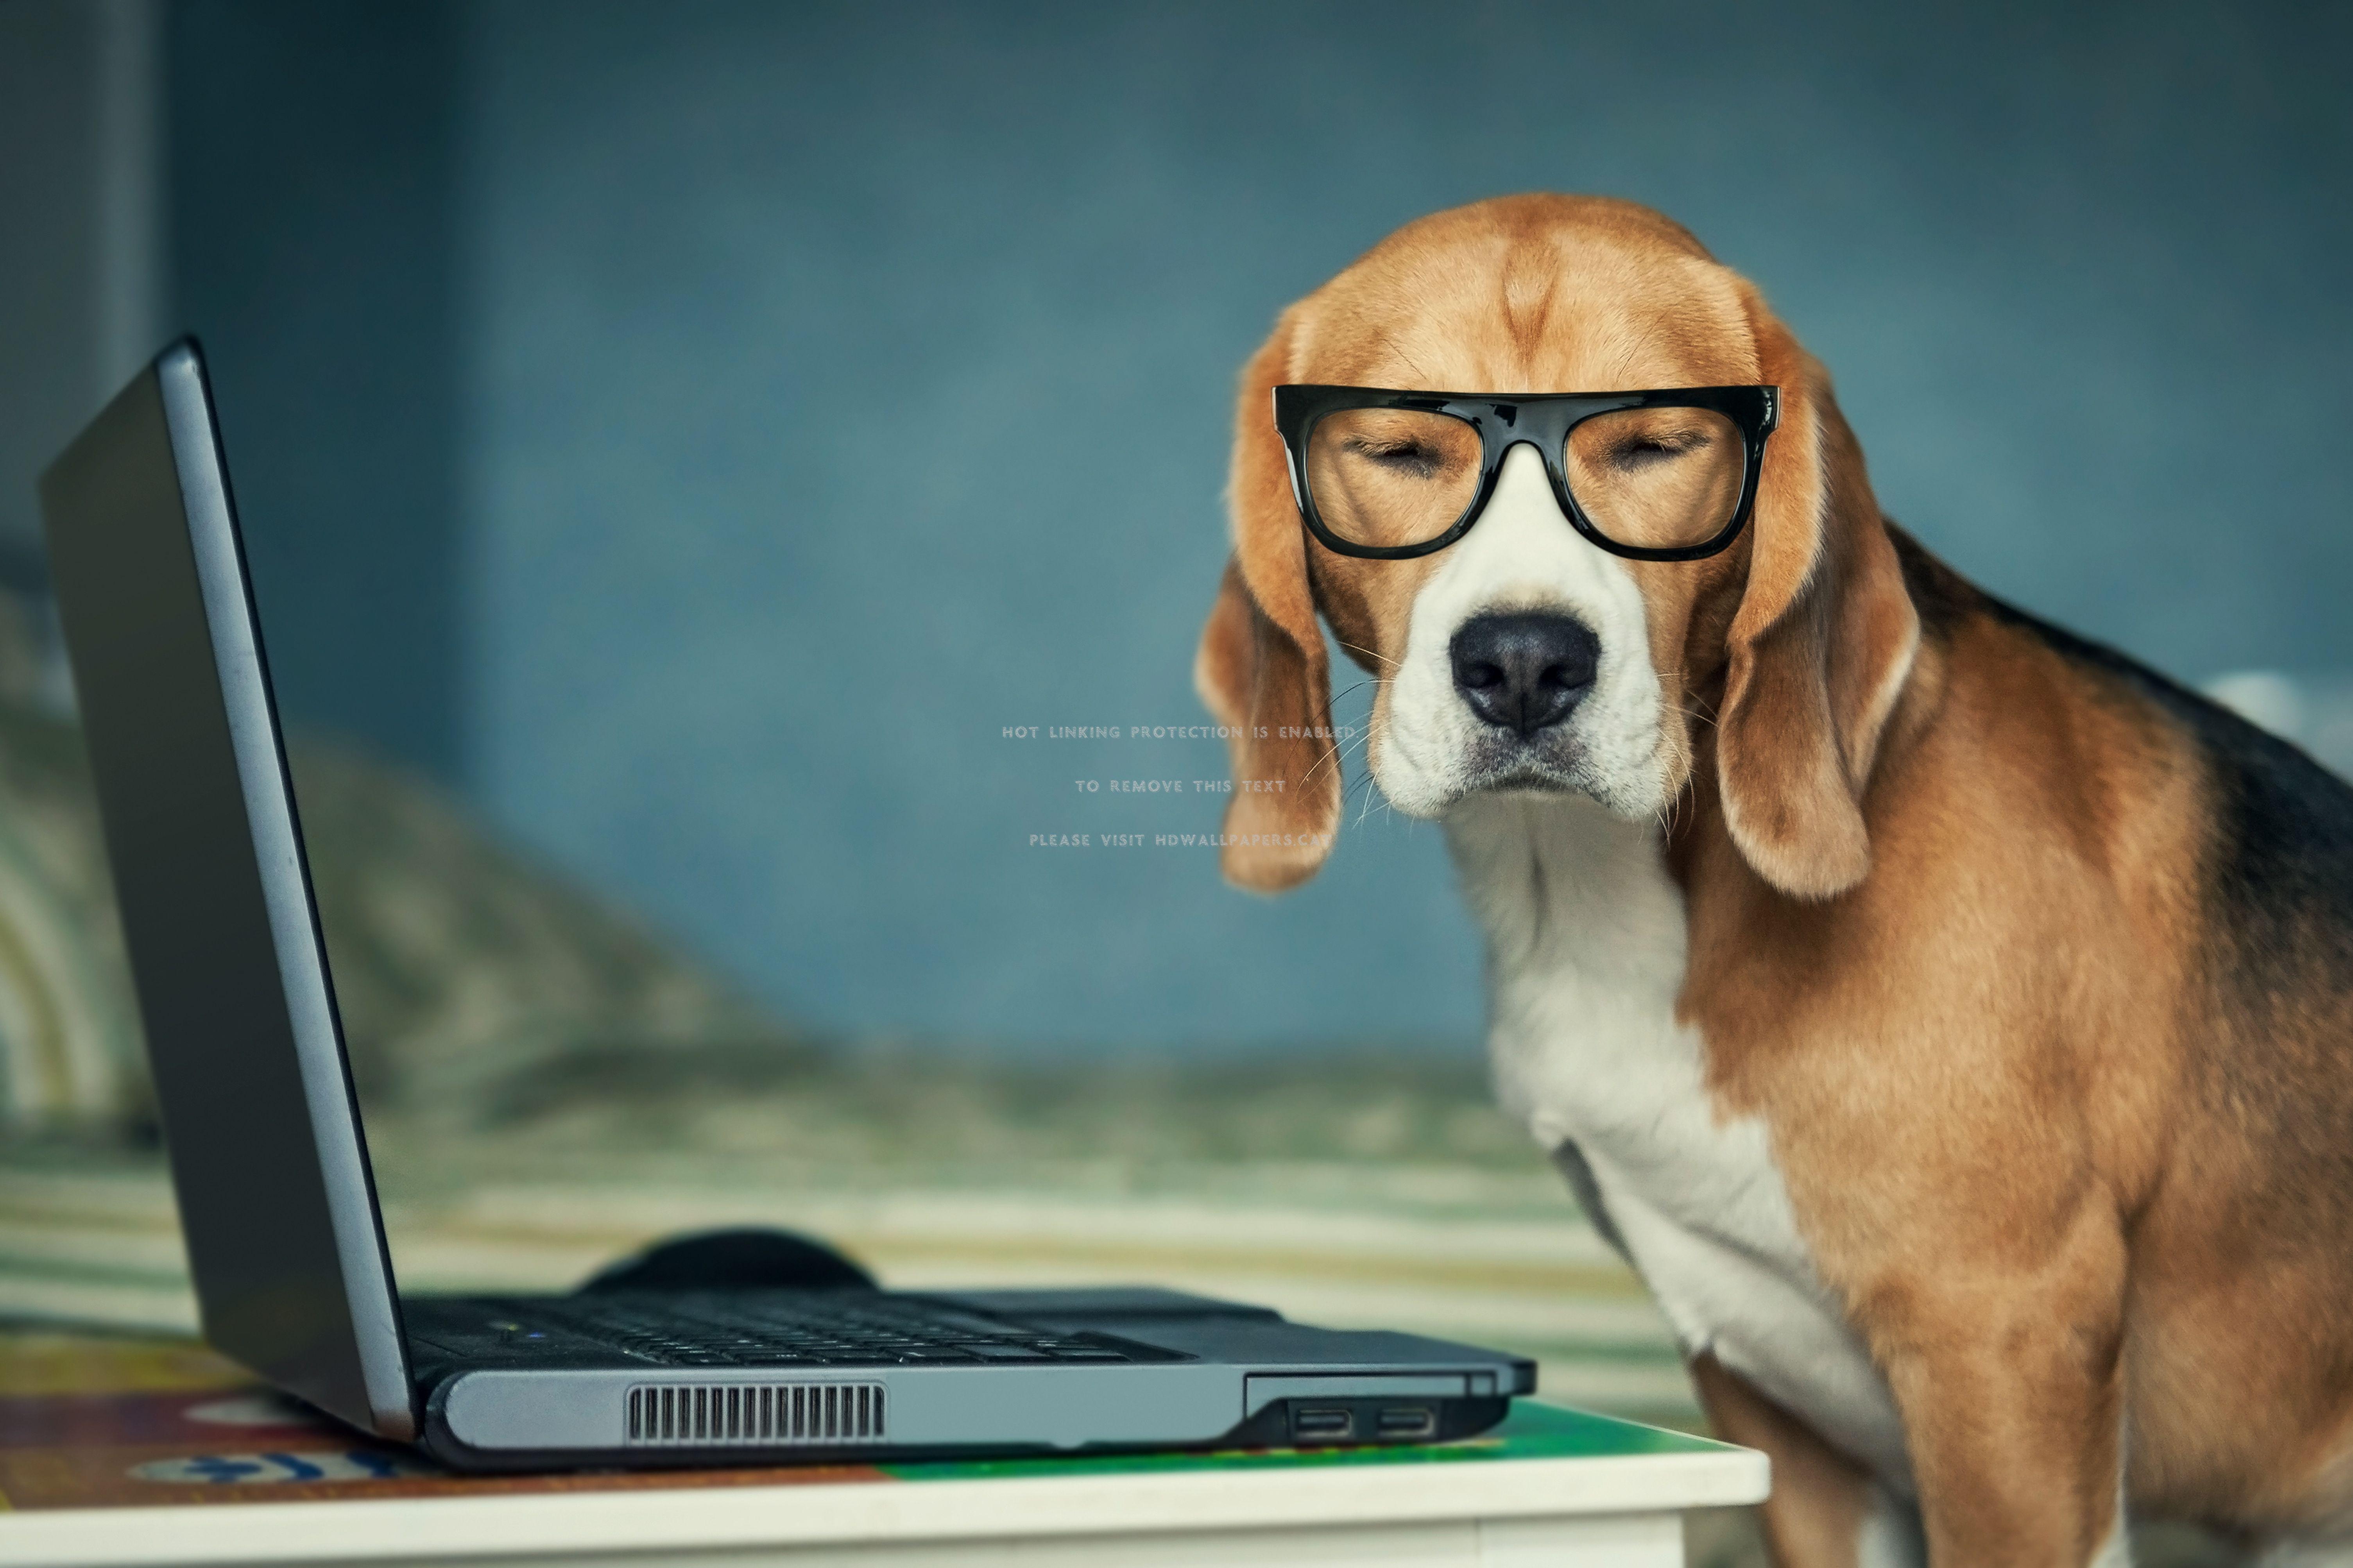 Cute Dogs with Glasses Wallpapers - Top Free Cute Dogs with Glasses